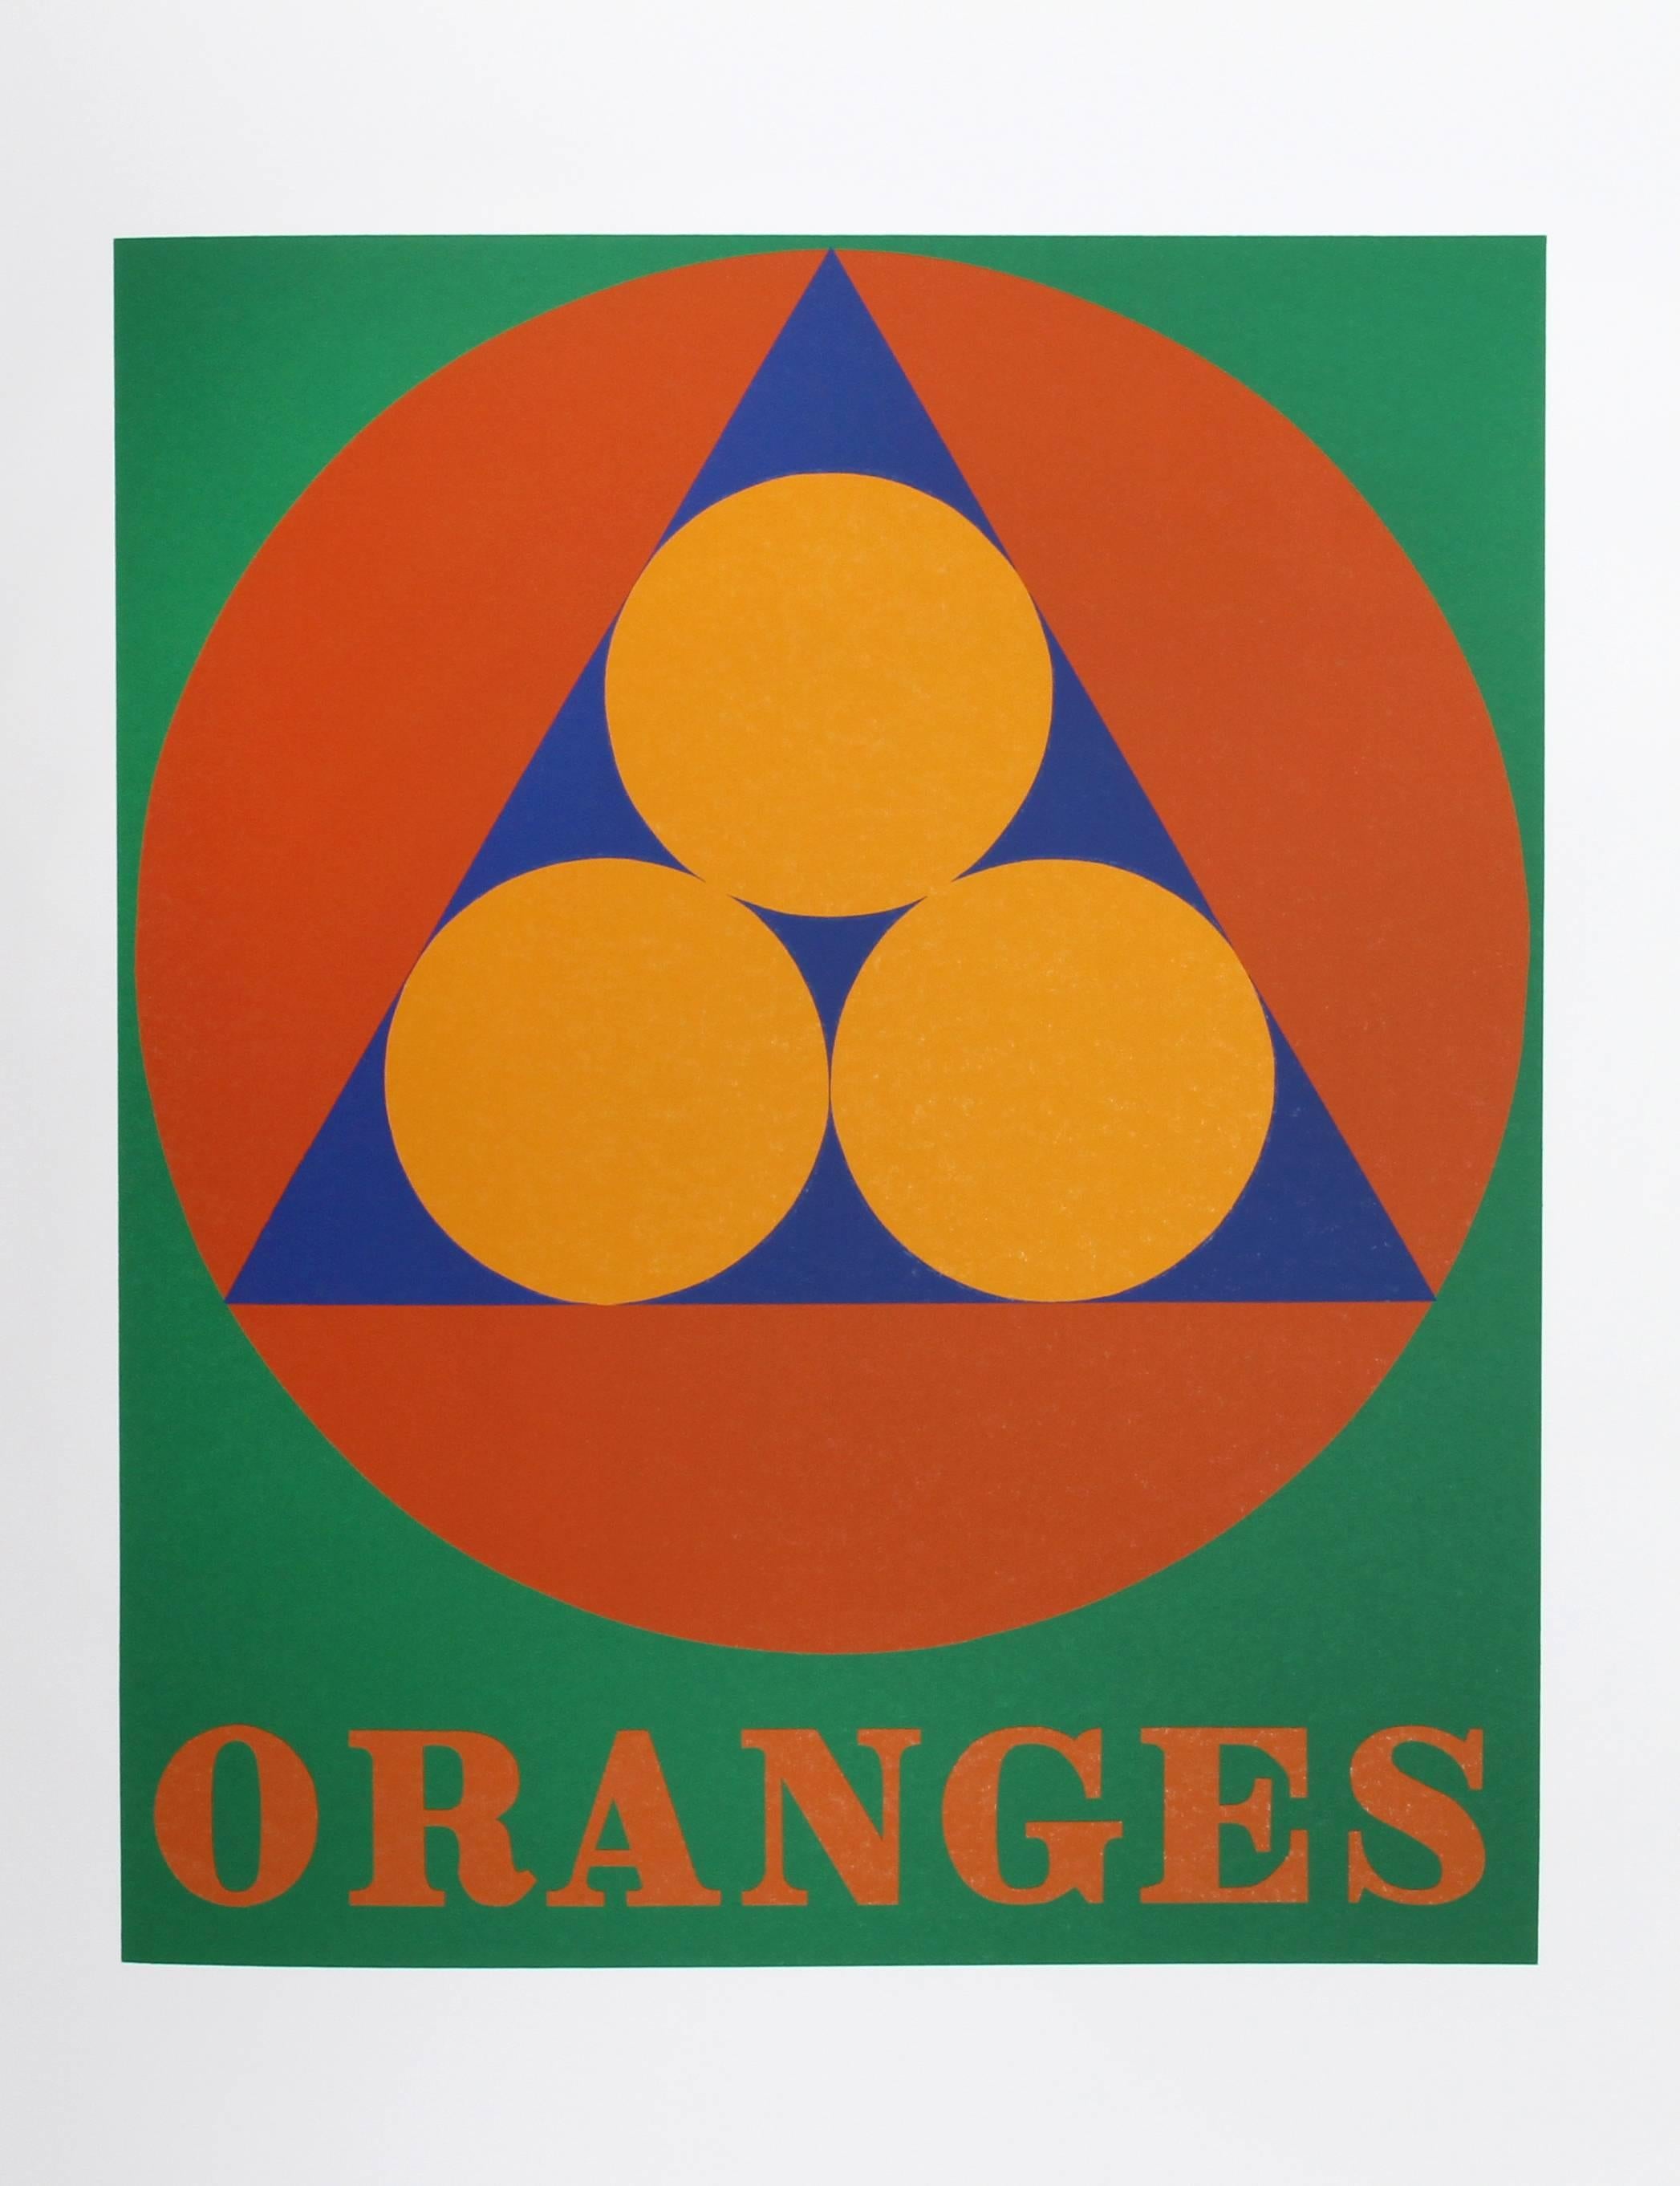 Artist: Robert Indiana, American (1928 - 2018)
Title: Oranges from the American Dream Portfolio
Year: 1969 (1997)
Medium: Serigraph
Edition Size: 395
Image Size: 16.75 x 14 inches
Size: 22 in. x 17 in. (55.88 cm x 43.18 cm)

Printed and Published by